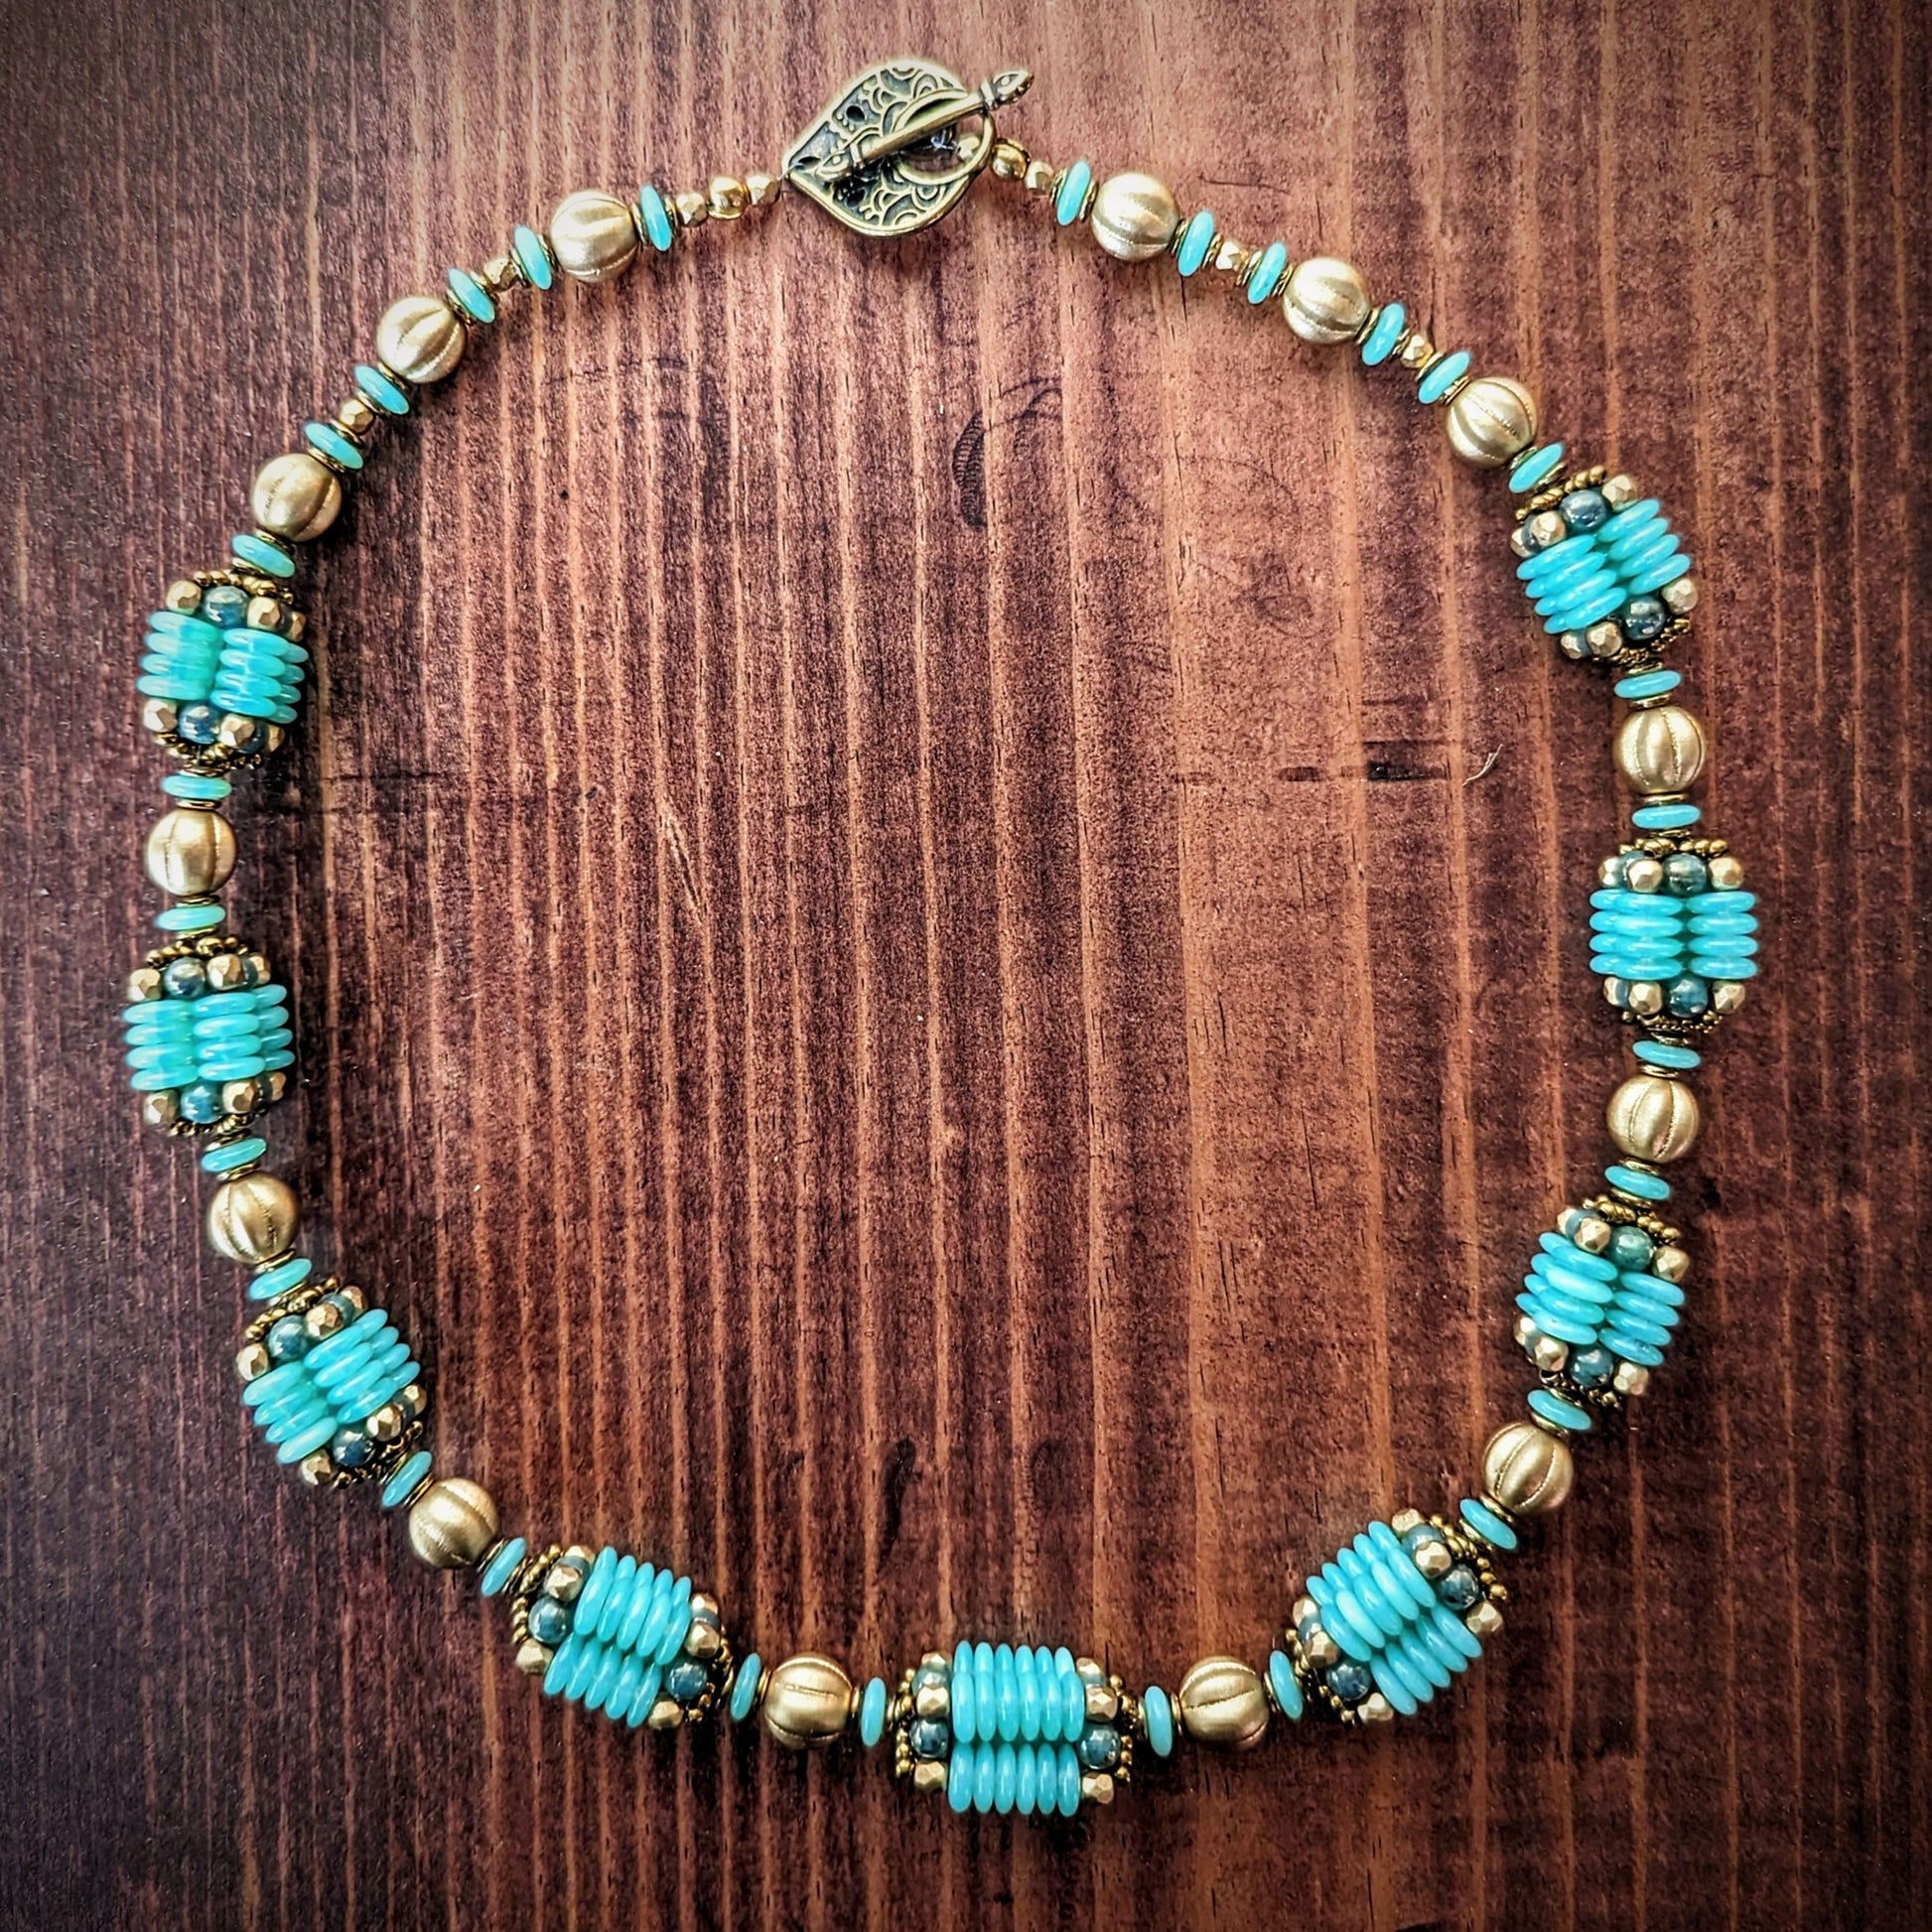 A light seafoam teal and gold necklace is laid out in a circle on a reddish wood board. The necklace has an alternating pattern of gold and seafoam beads, with nine handmade beaded beads with columns of light opalescent seafoam Czech glass discs with lustered teal accents. The necklace has a delicately patterned teardrop shaped brass toggle clasp.